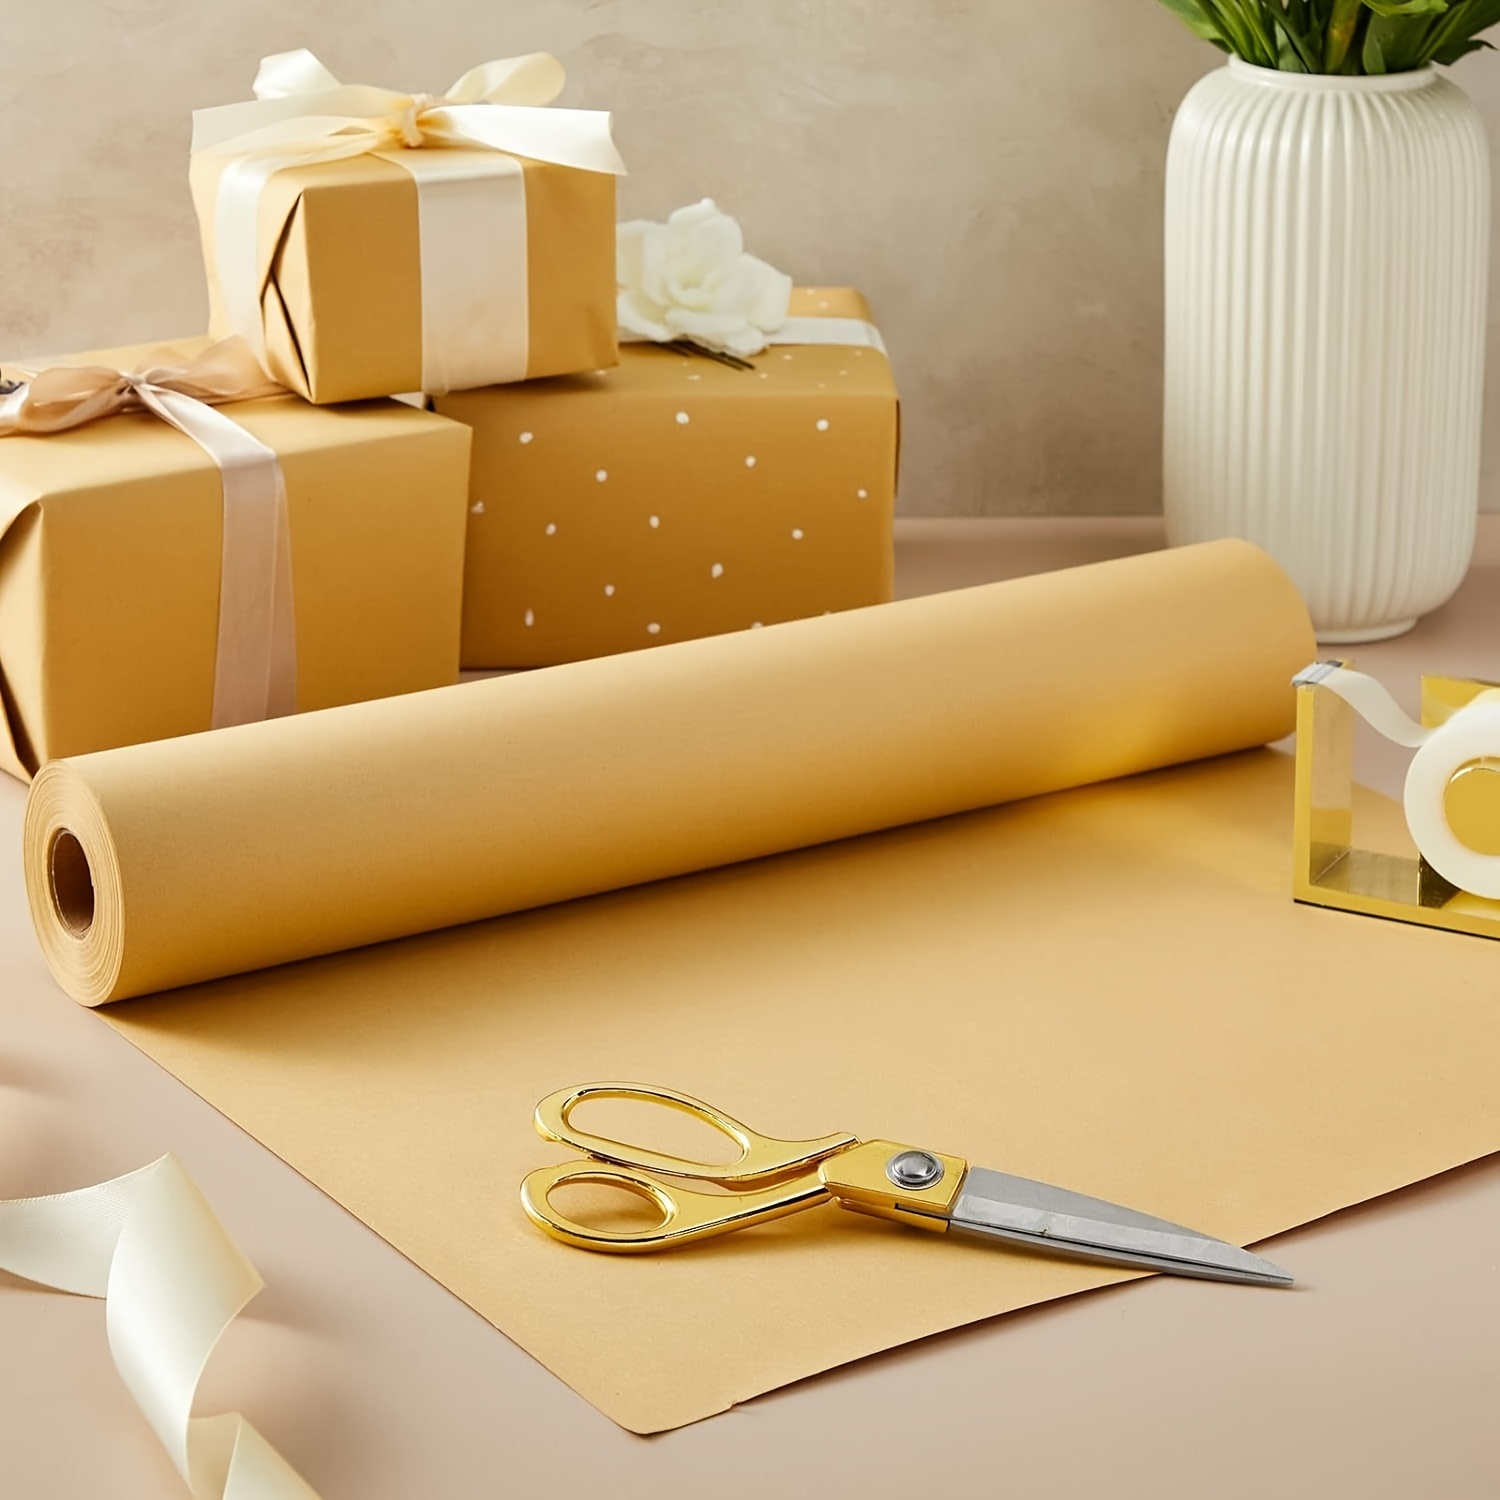 Kraft Paper Roll, Plain Brown Shipping Paper For Gift Wrapping, Packing,  Diy Crafts, Bulletin Board Easel, Wrapping Paper, Tissue Paper, Flower  Bouquet Supplies, Gift Wrapping Paper, Flower Wrapping Paper, Gift  Packaging, Weddings